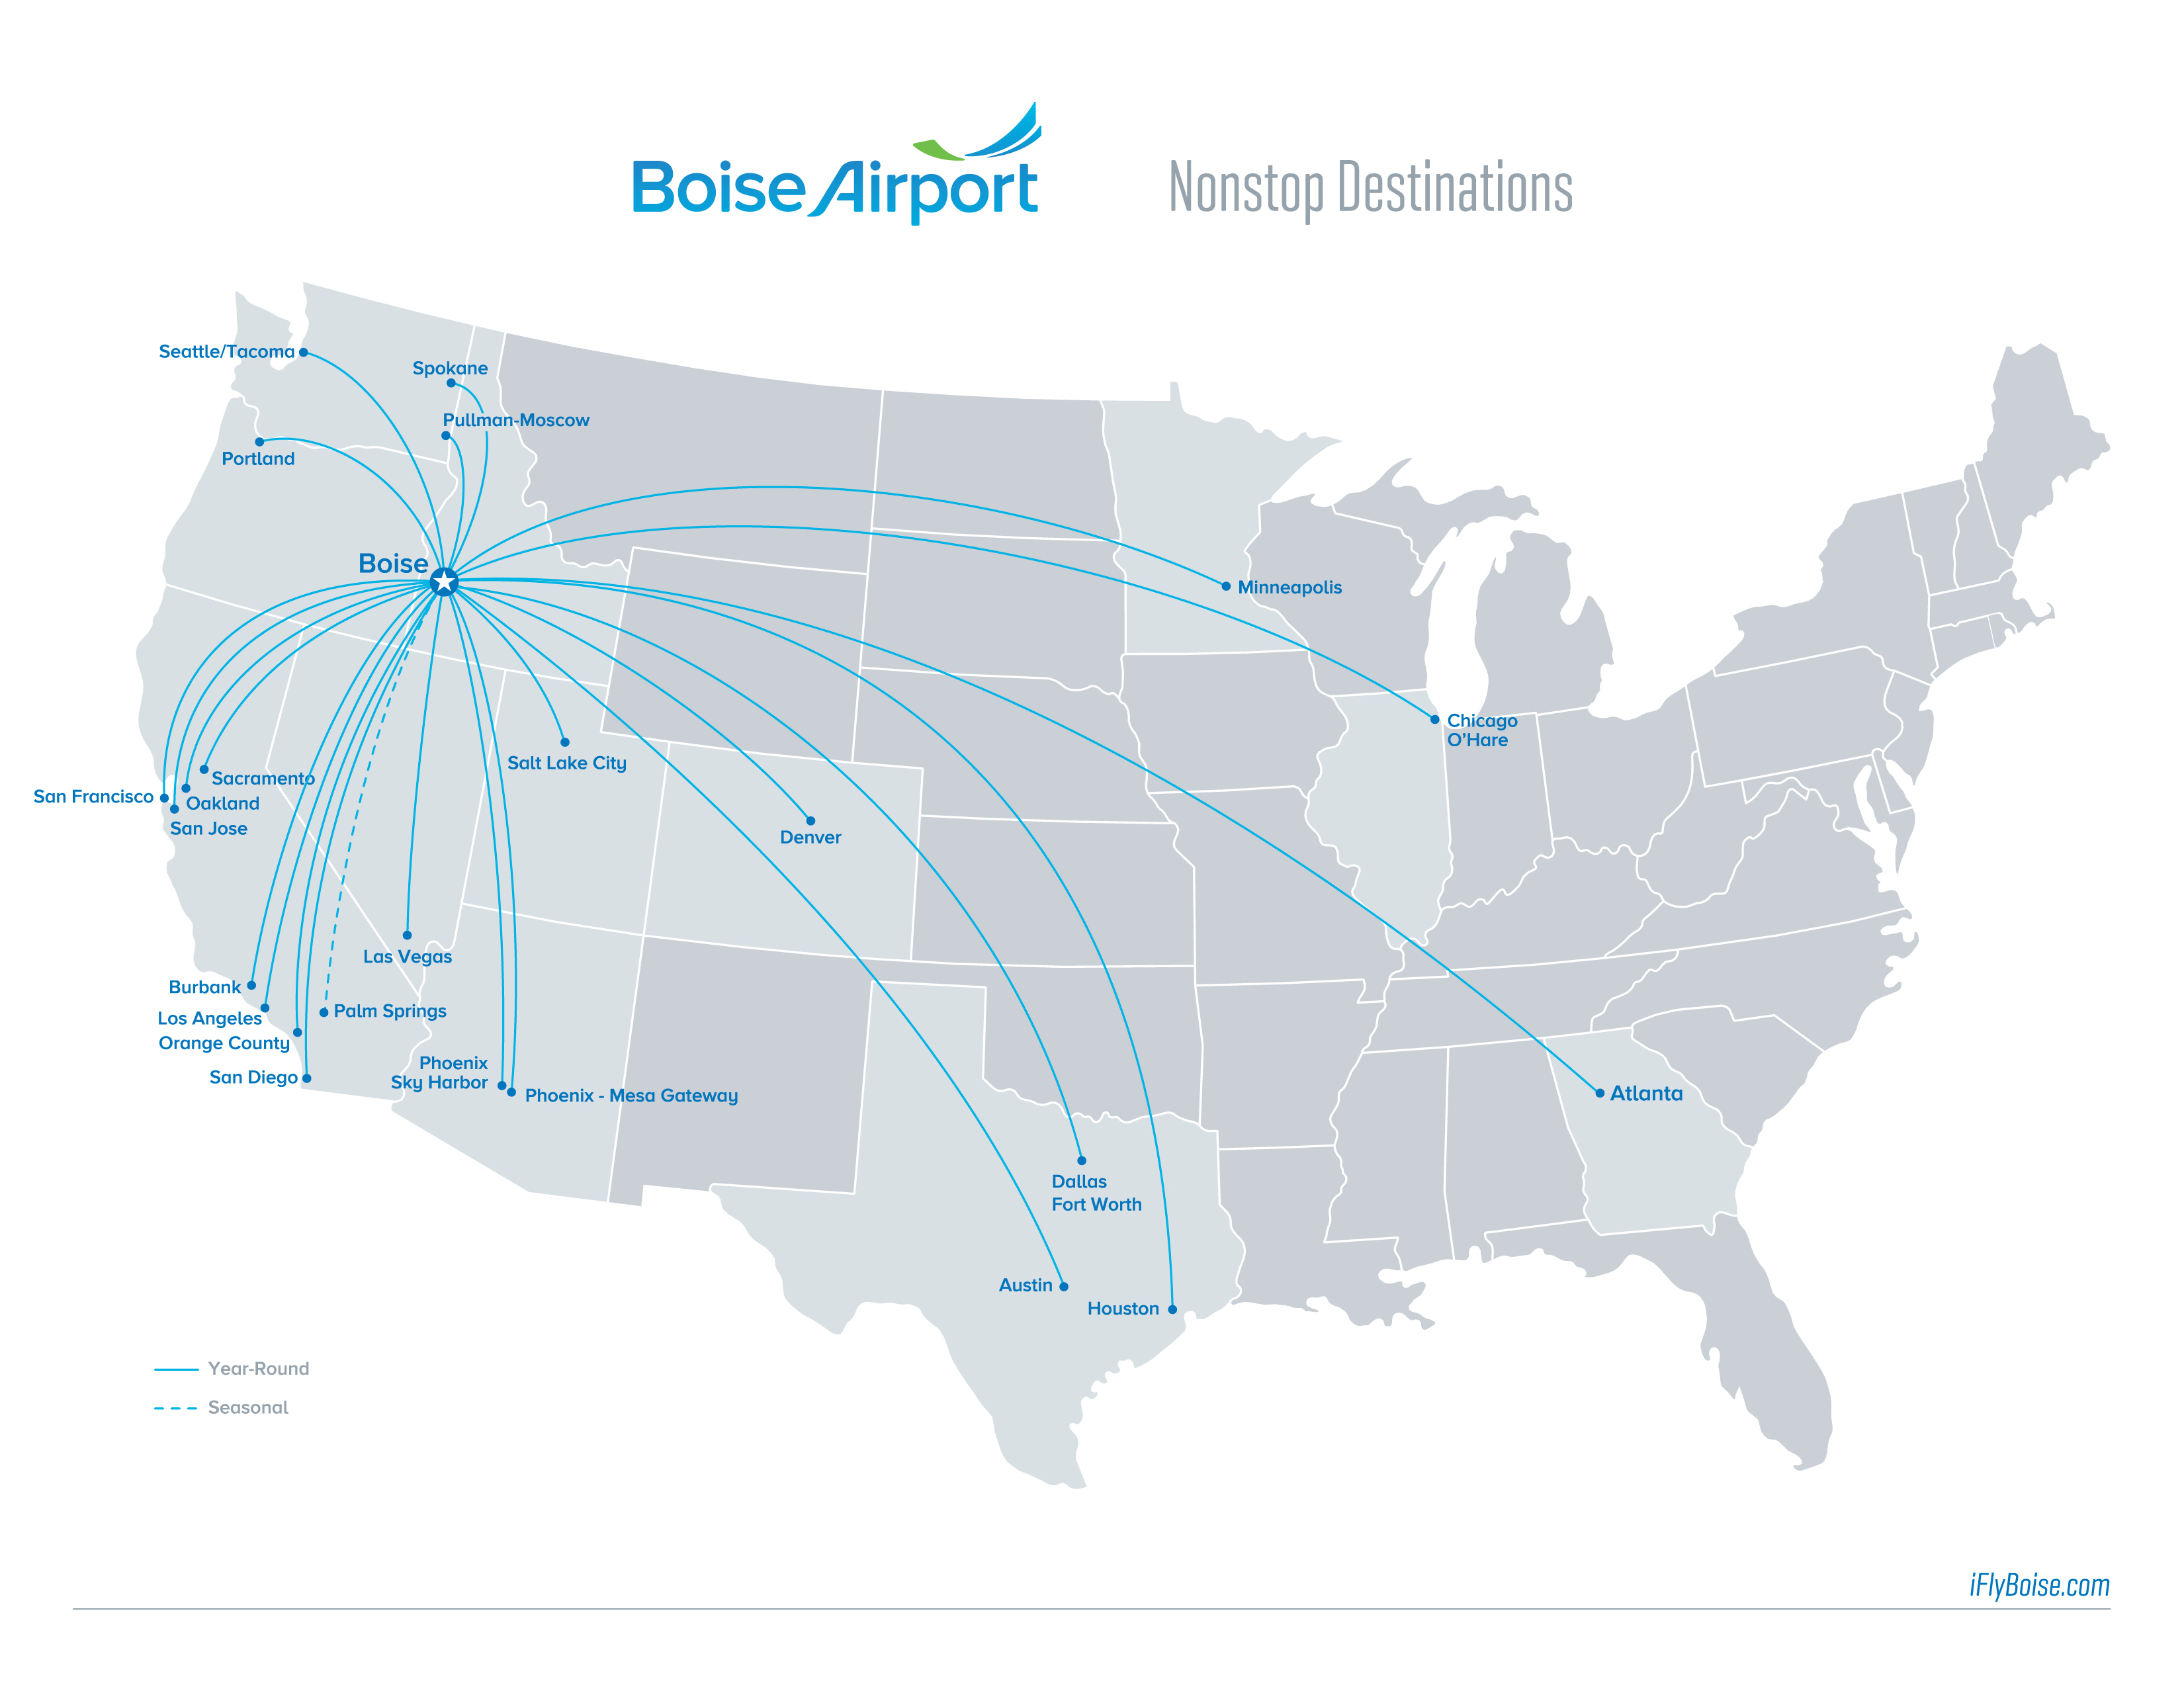 Nonstop flights from the Boise Airport